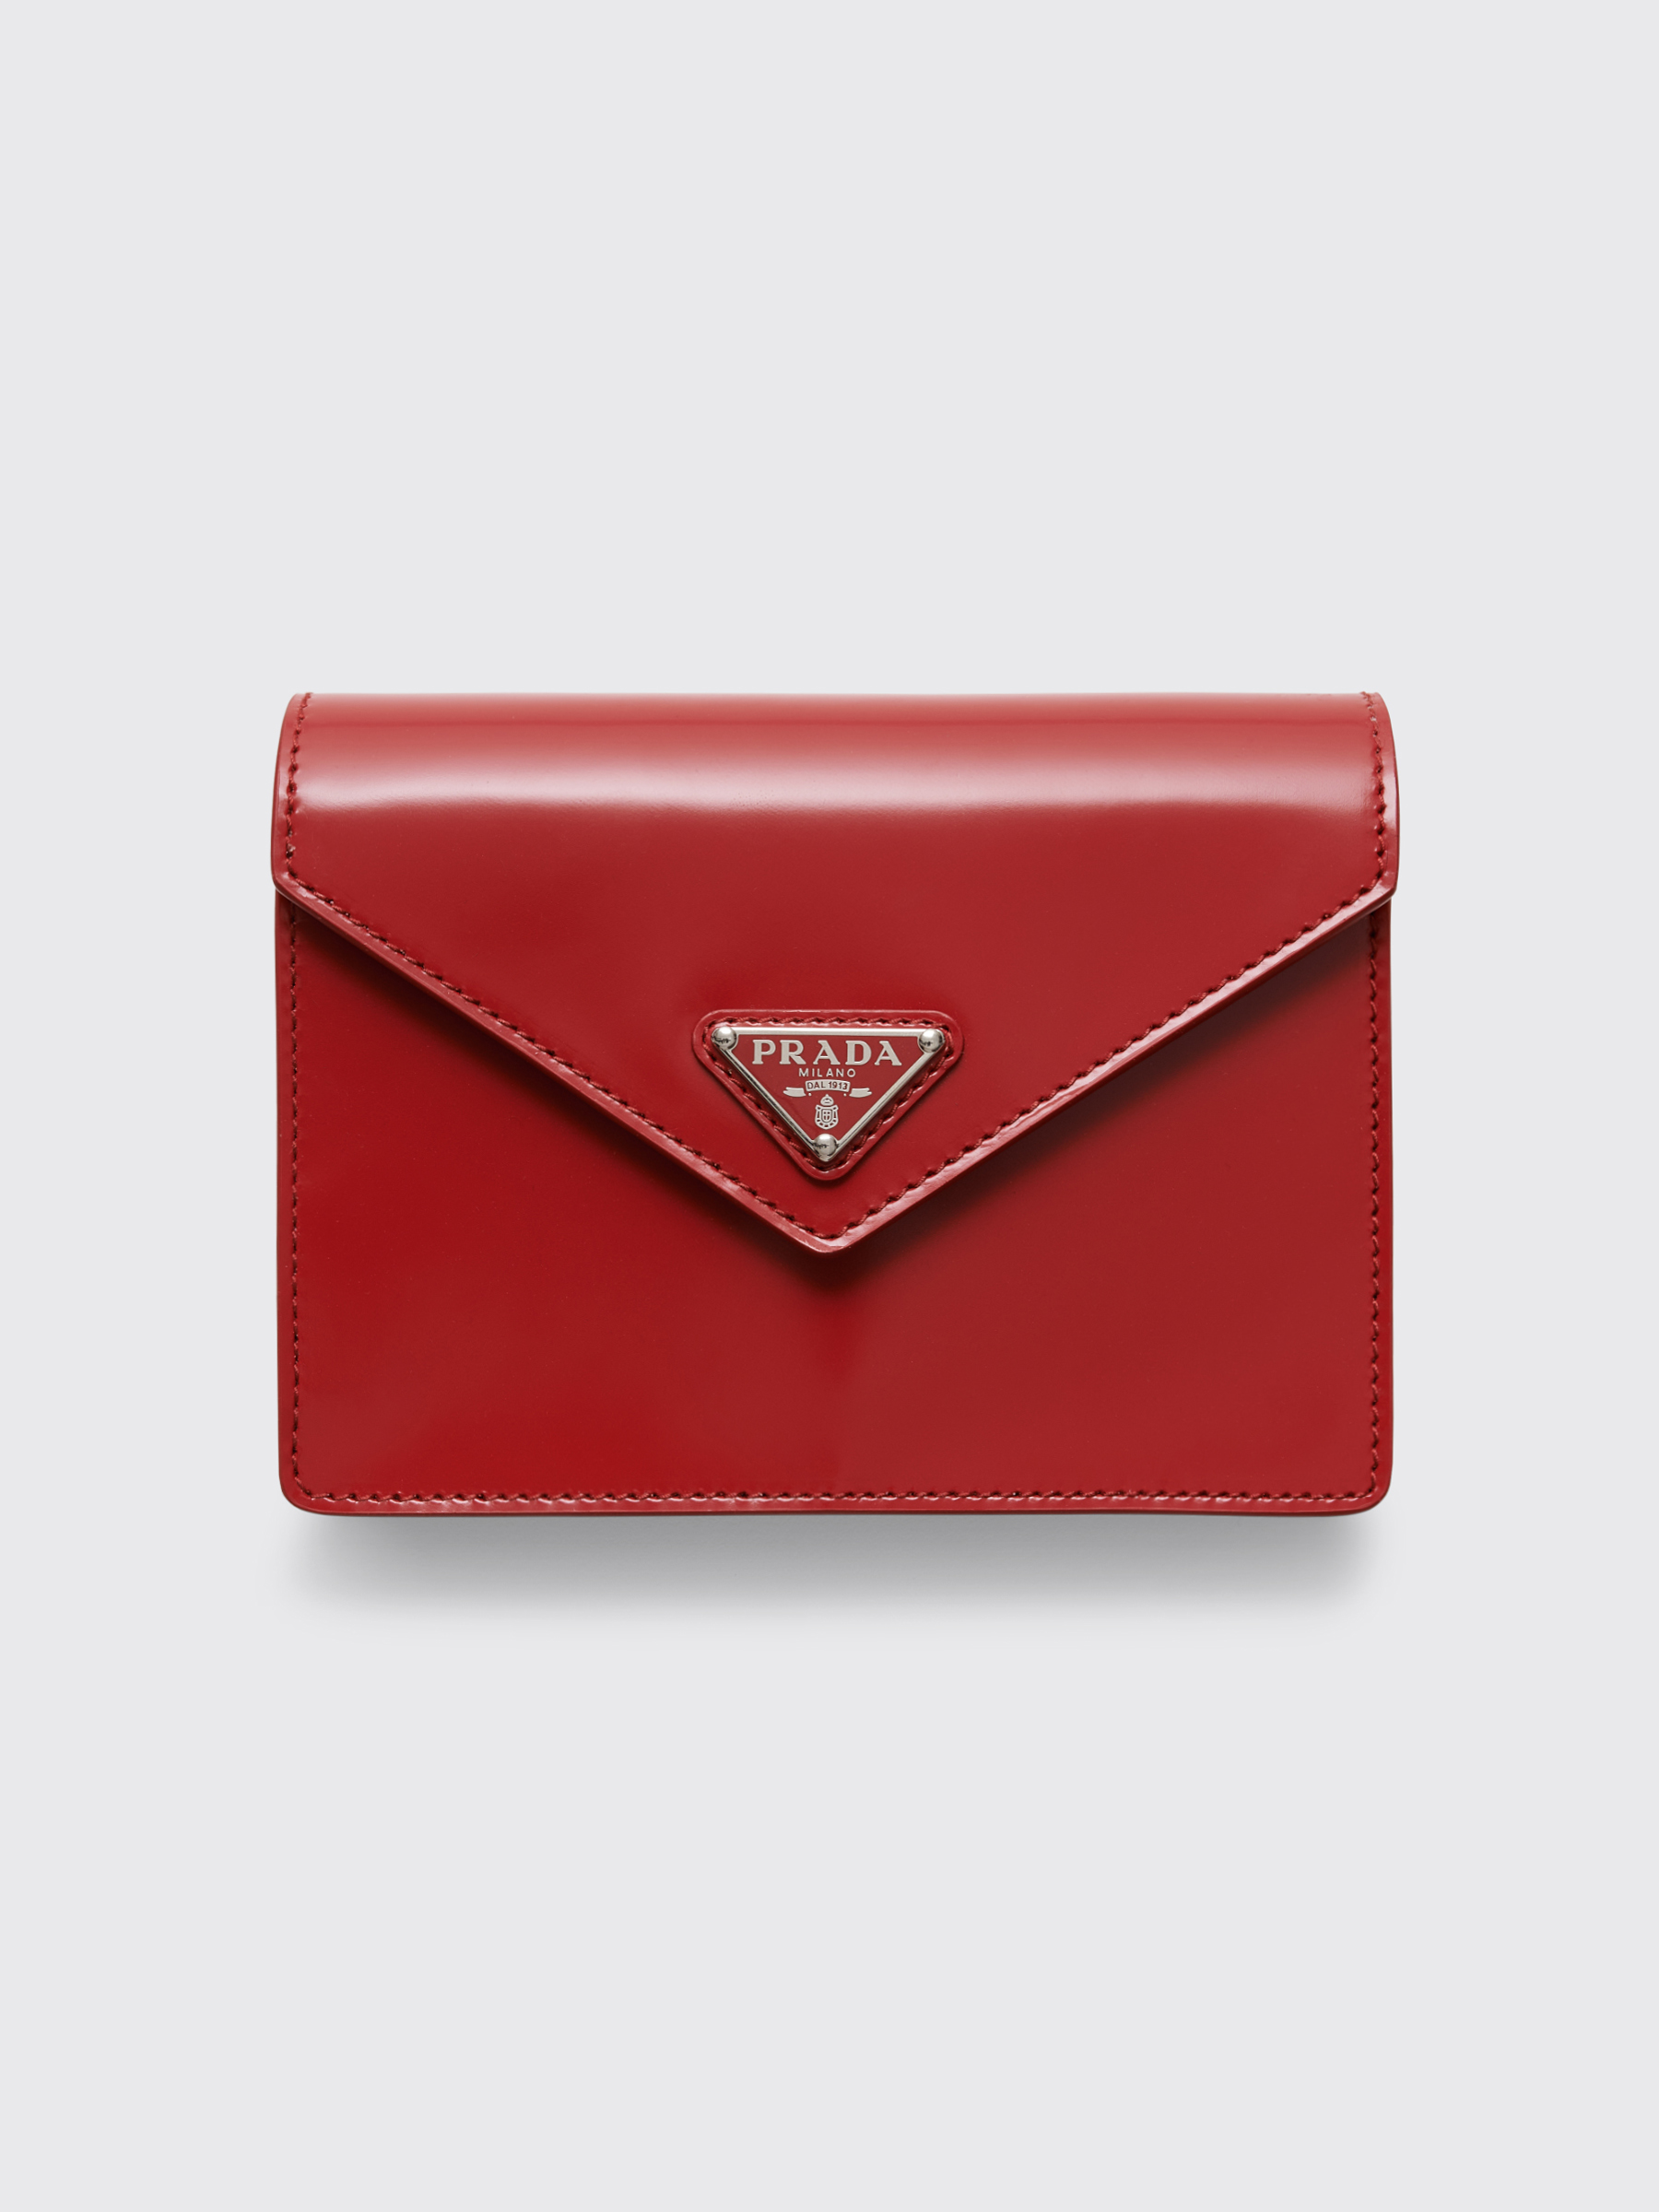 Très Bien - Prada Playing Cards With Leather Case Scarlet Red